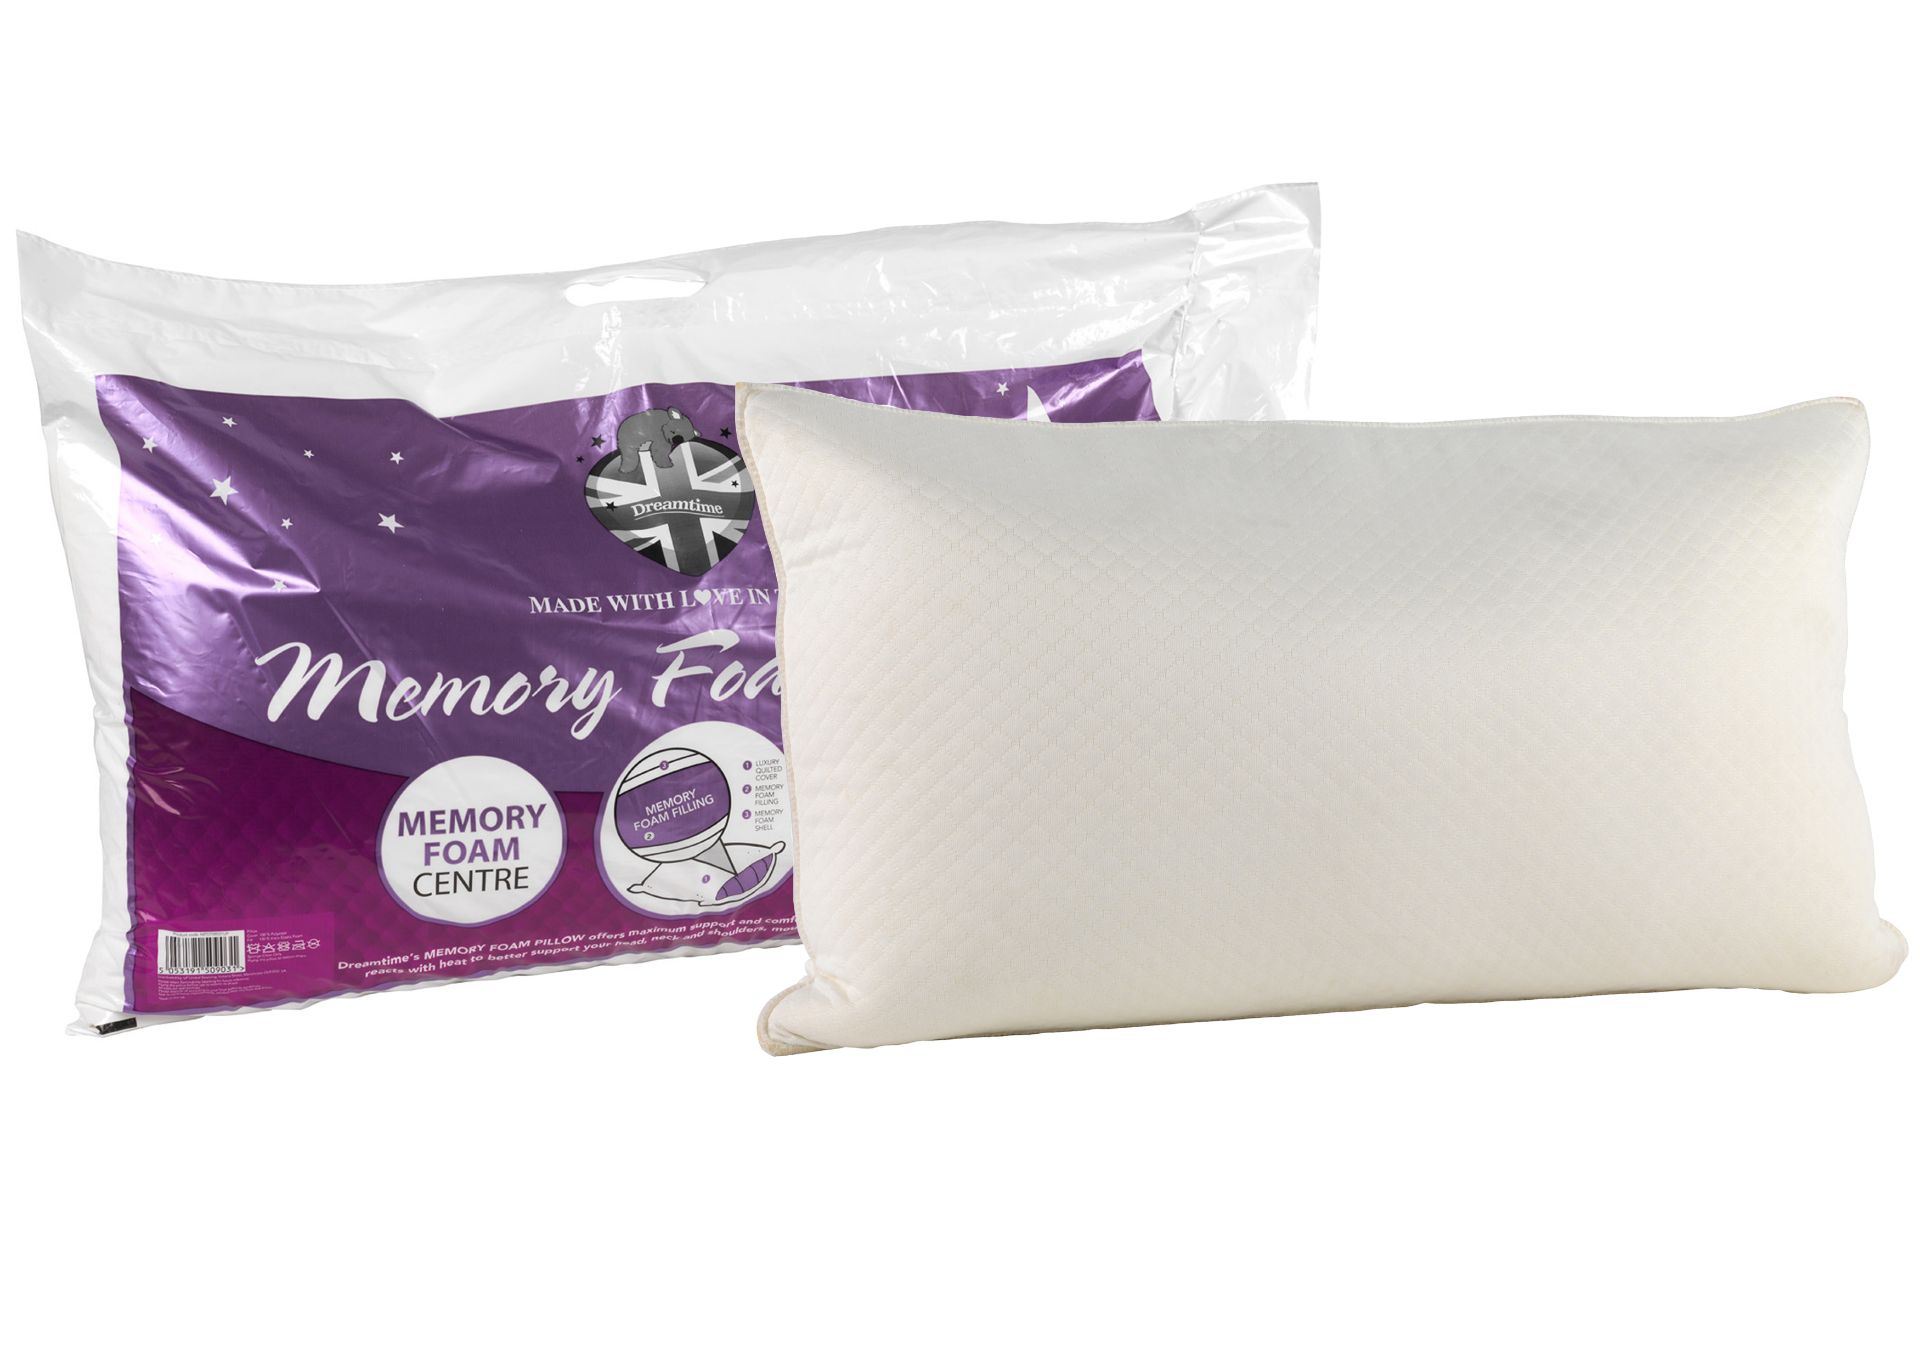 V *TRADE QTY* Brand New Memory Foam Pillow With Luxury Quilted Cover RRP£14.99 X 50 YOUR BID PRICE